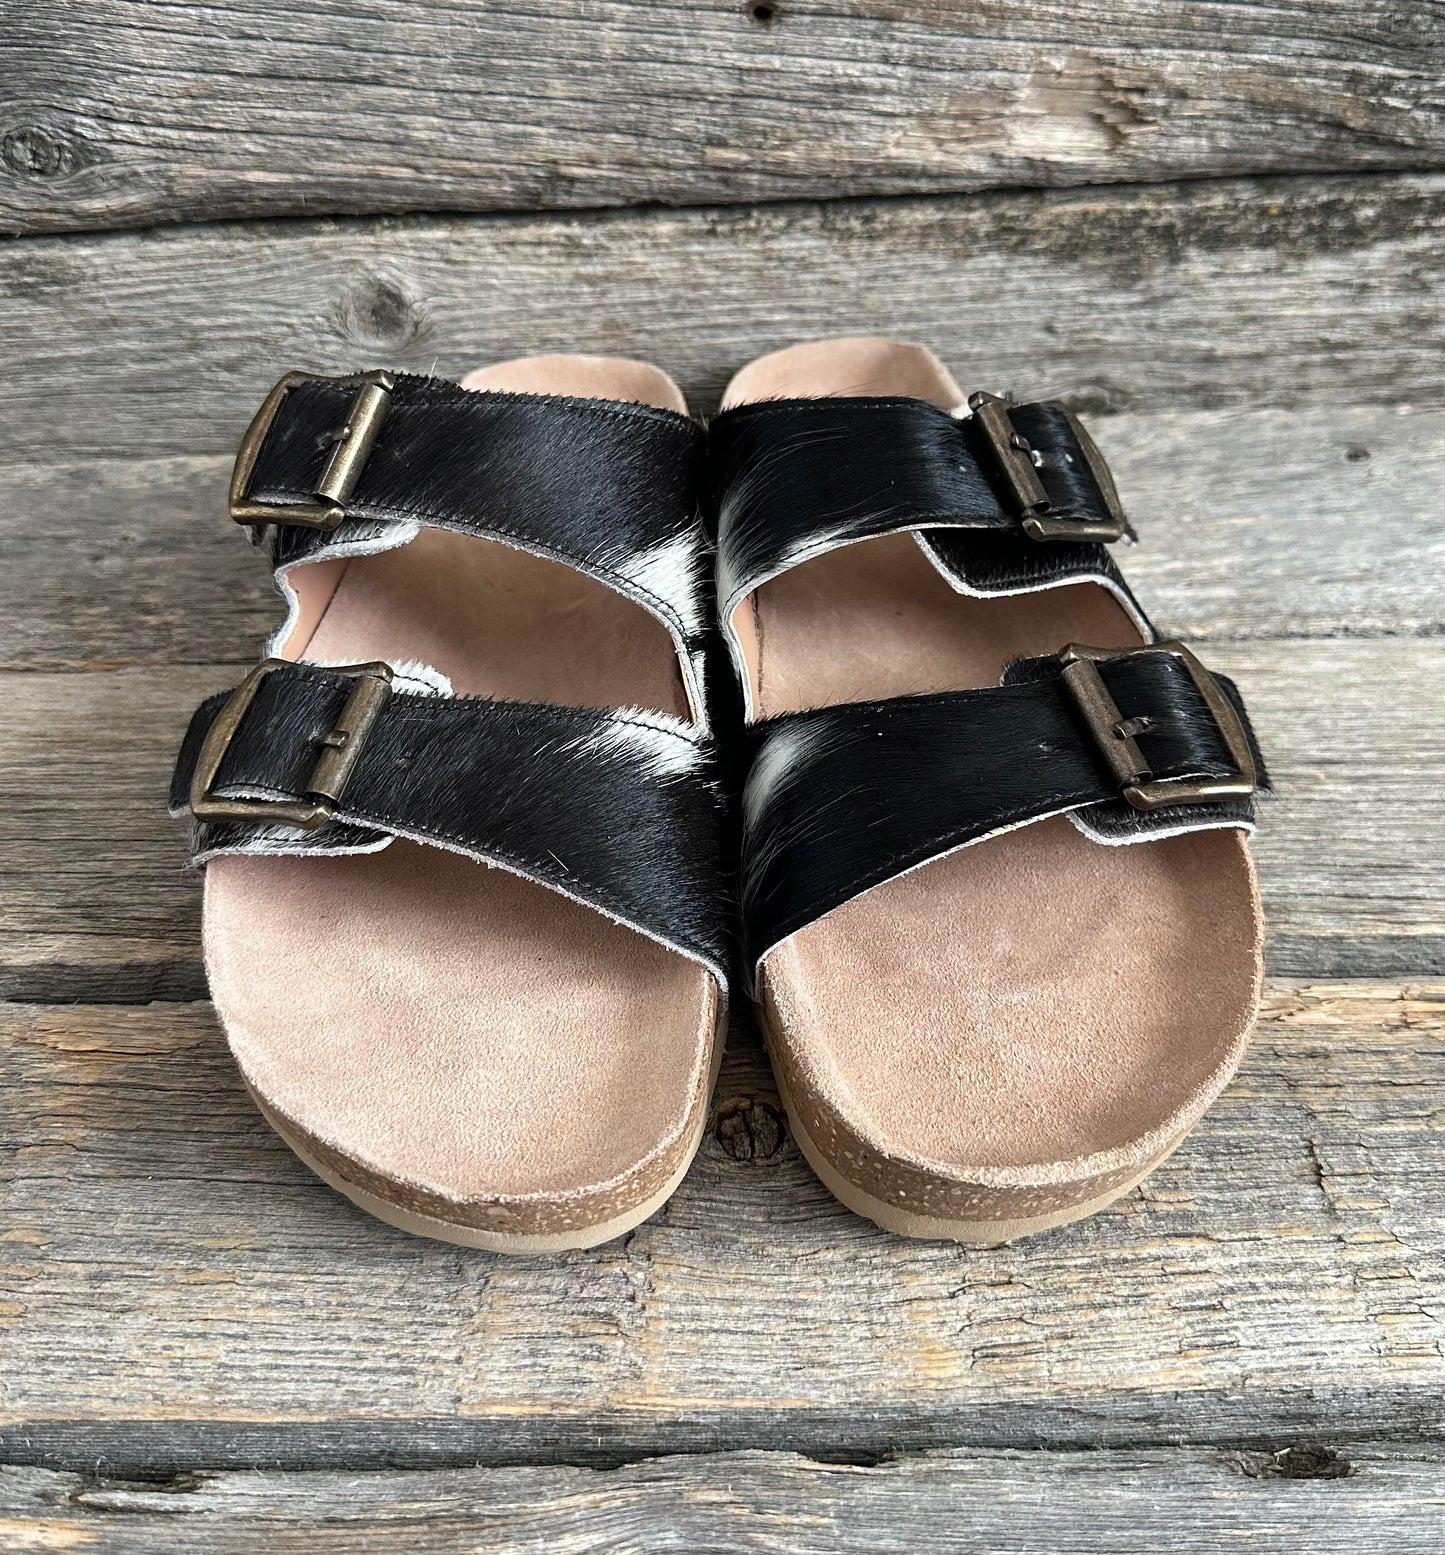 The Lola Cowhide Sandals - Size 8